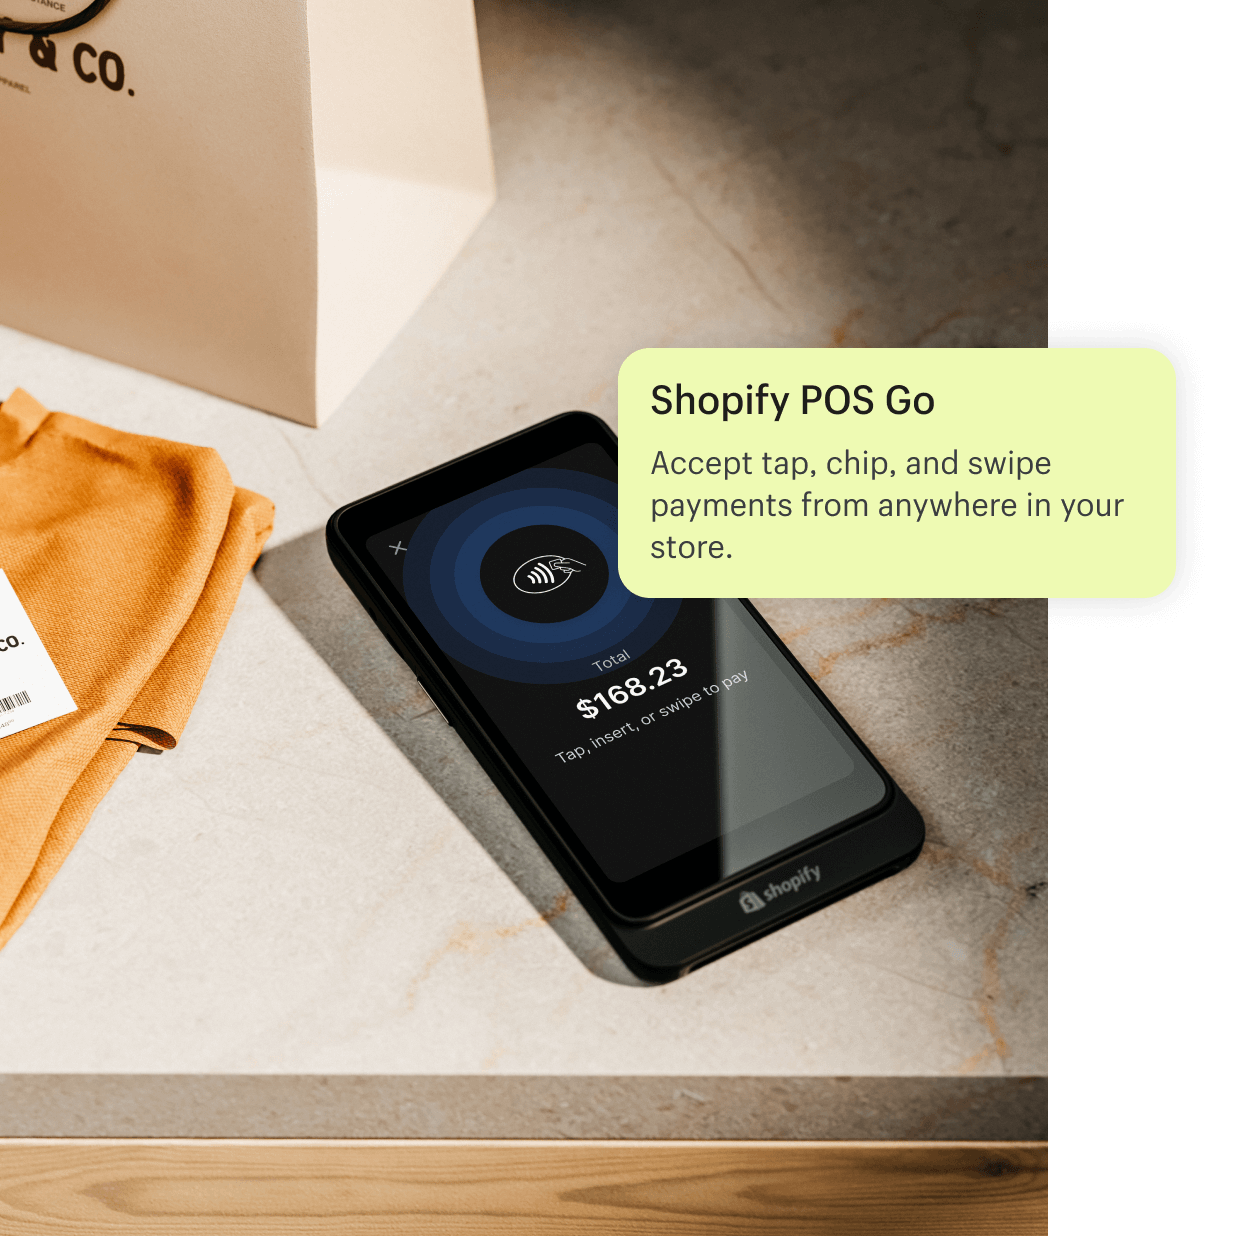 An image of the POS Go device placed on a counter after completing a transaction with a customer. The POS Go is Shopify’s mobile point of sale that accepts tap, chip, and swipe payments.